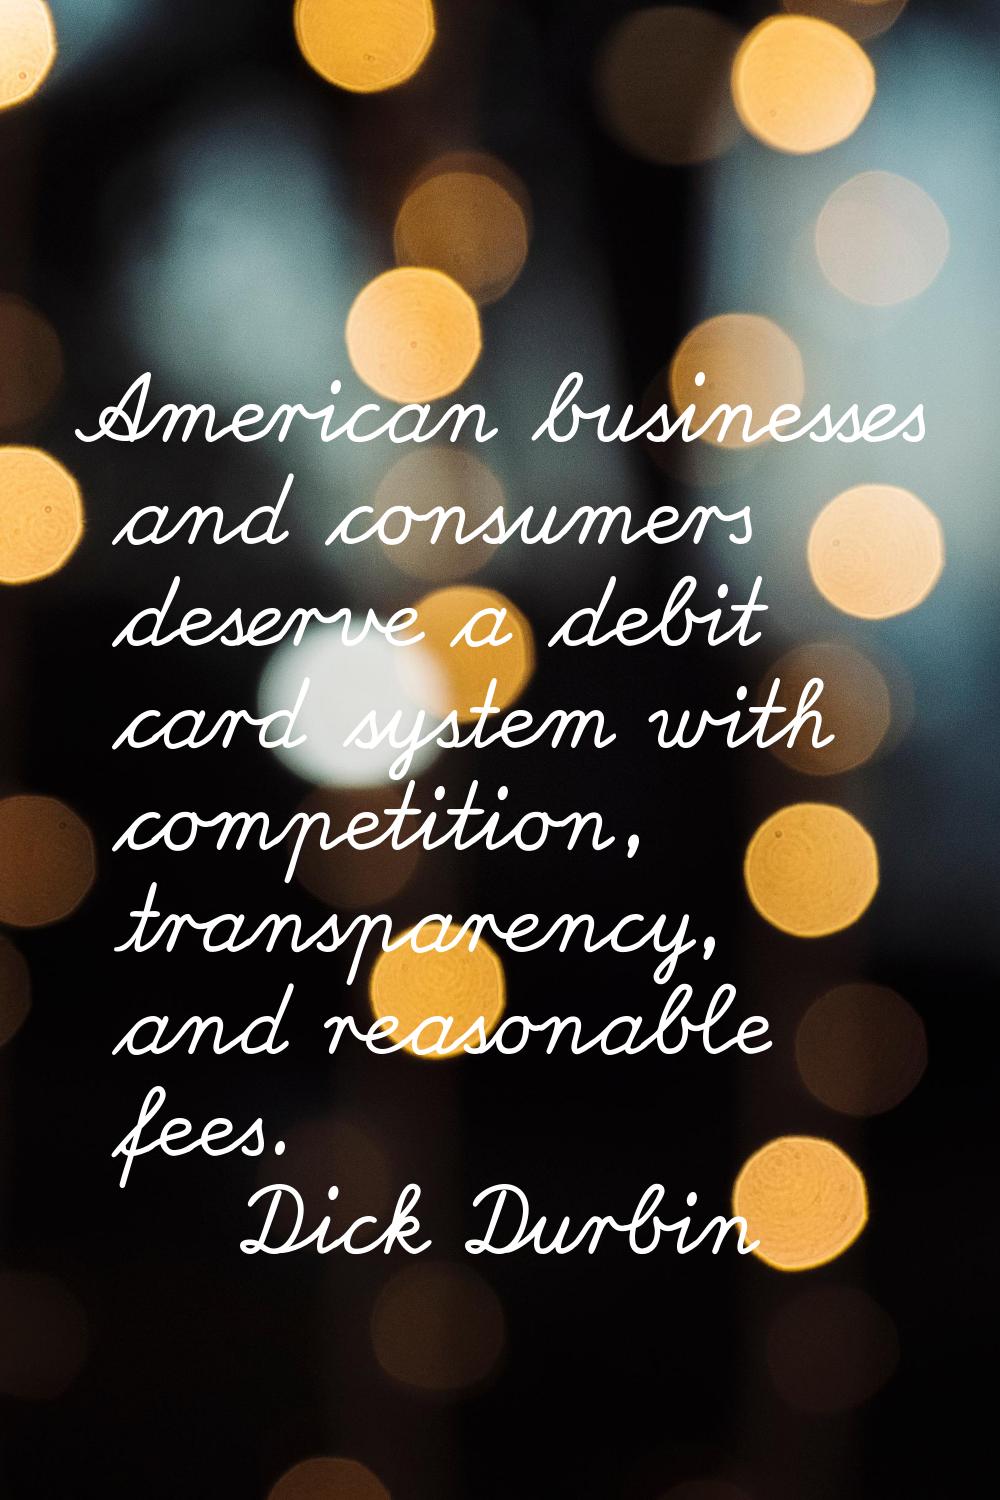 American businesses and consumers deserve a debit card system with competition, transparency, and r